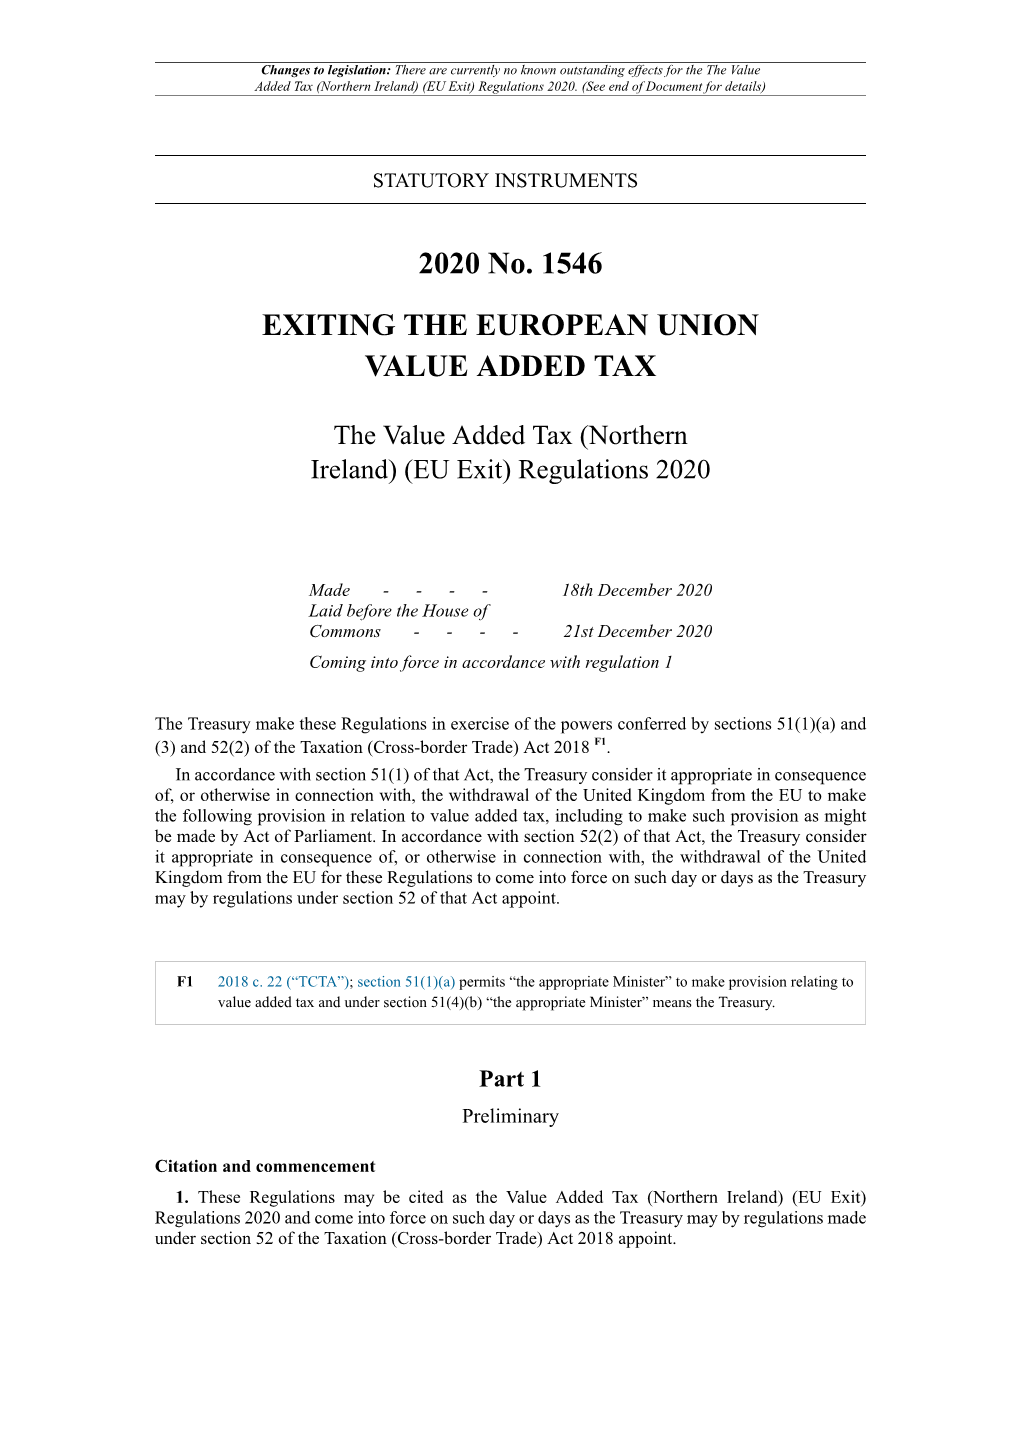 The Value Added Tax (Northern Ireland) (EU Exit) Regulations 2020